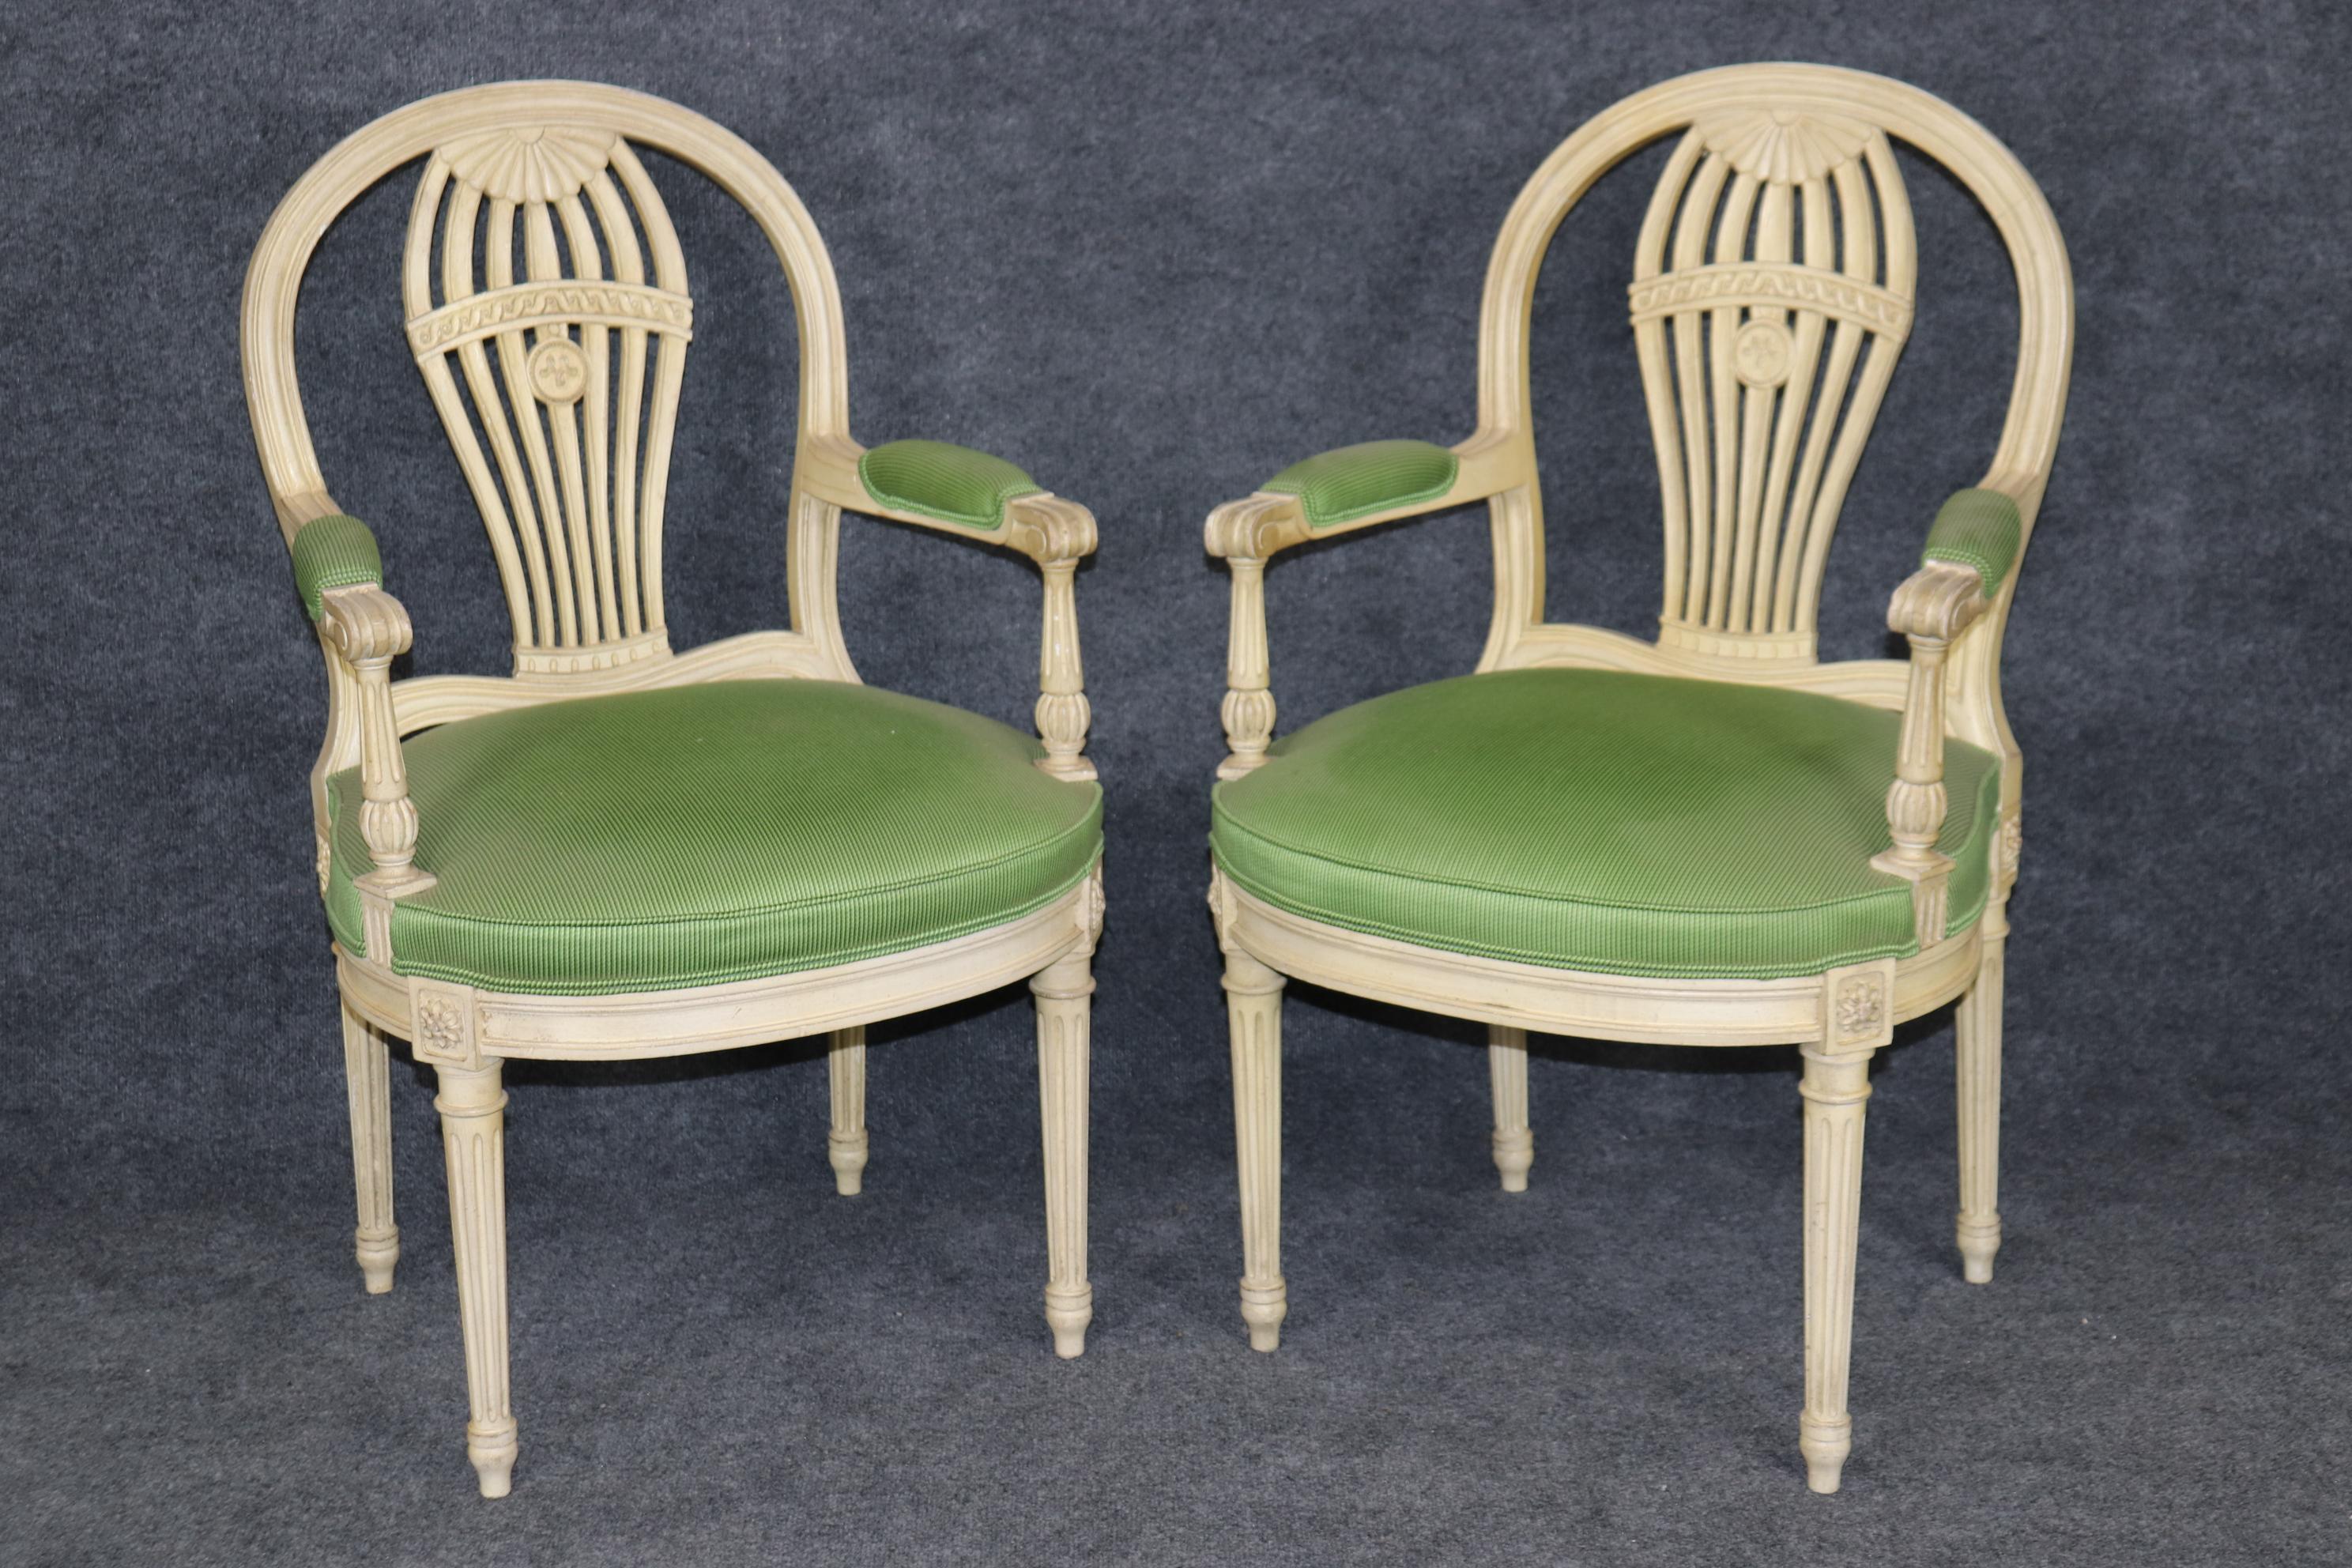 This is a gorgeous set of 8 French-made Maison Jansen dining chairs in the balloon back style. The chairs show a time-worn painted off-white finish and some tell-tale signs of age such as distressing and finish variations from fading. The upholstery